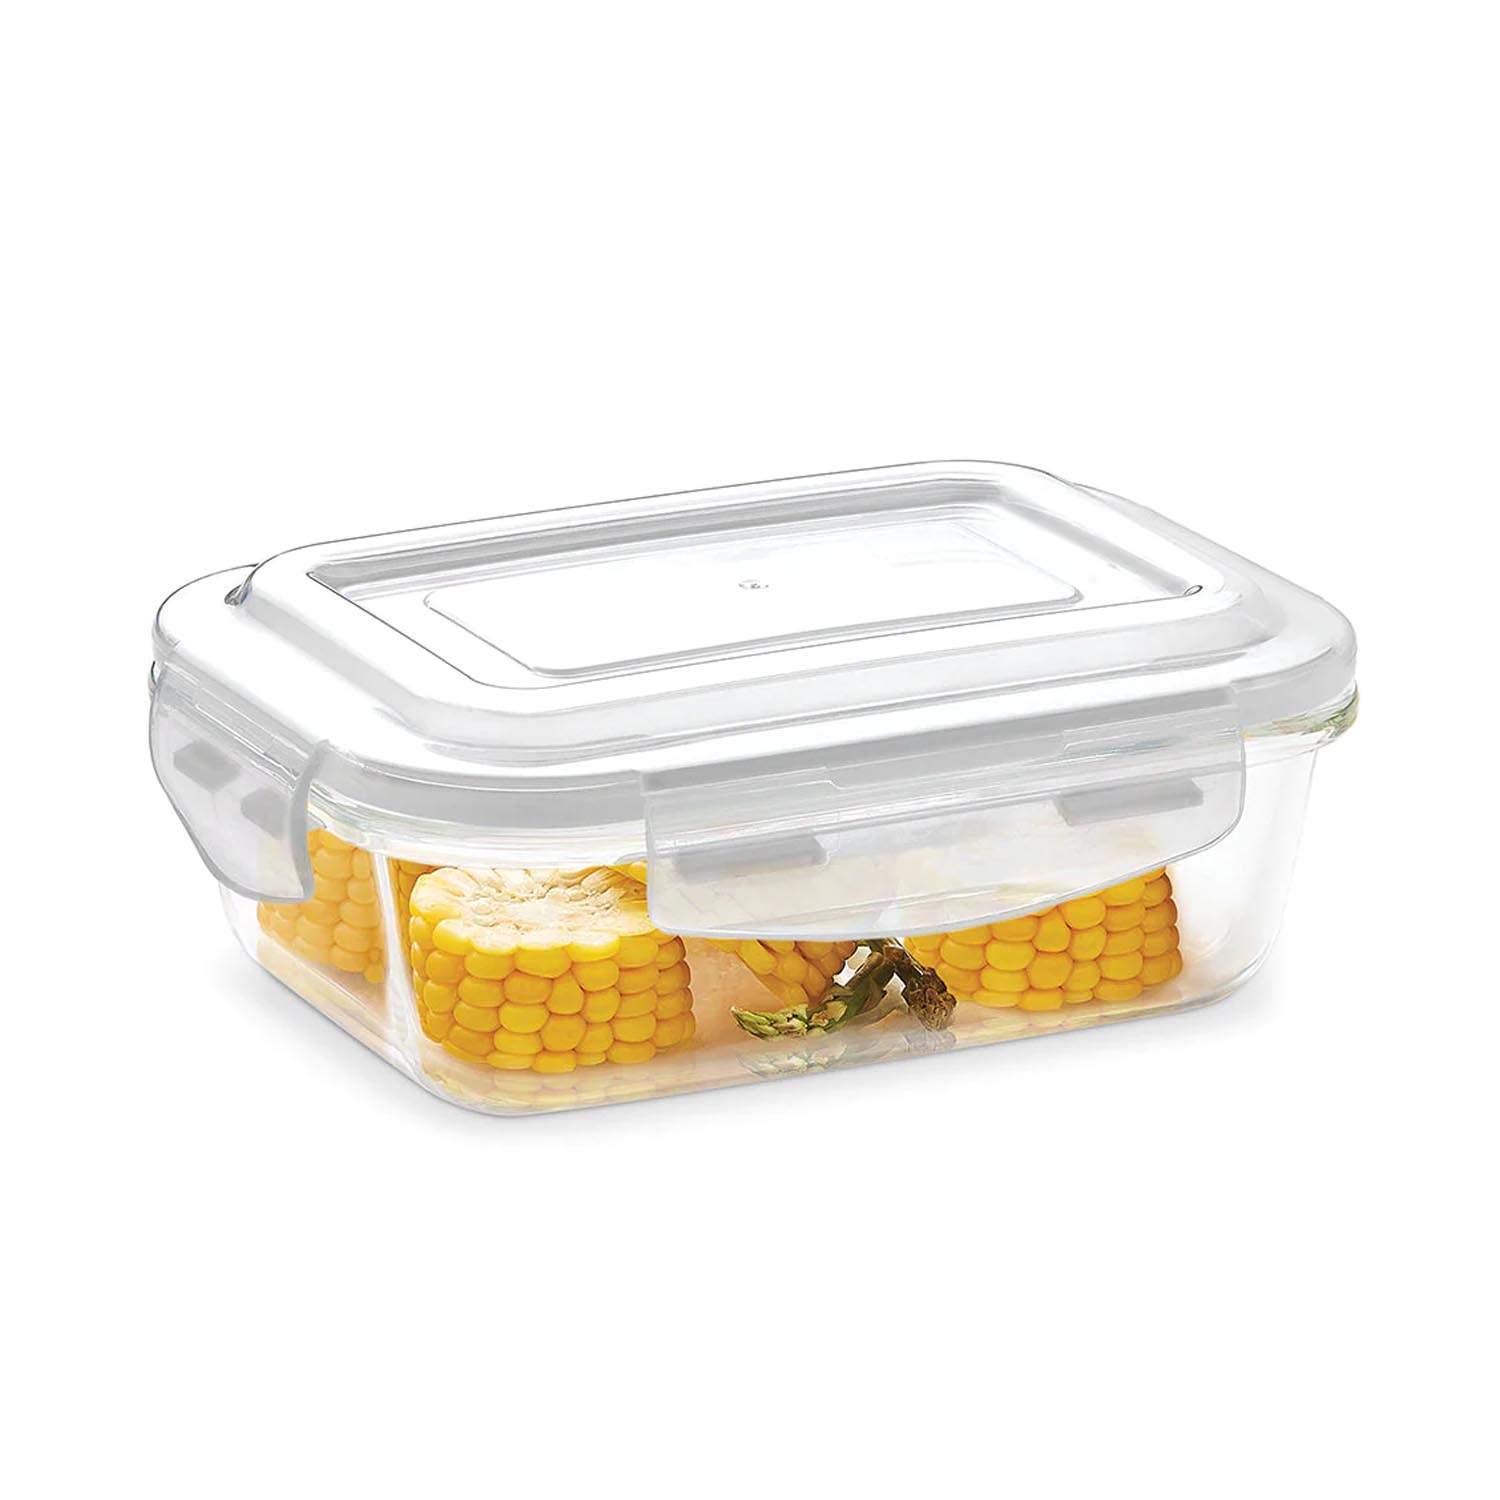 Borosil Klip-N-Store Rectangular Glass Storage Container With Air Tight Lid 2.0 Litre